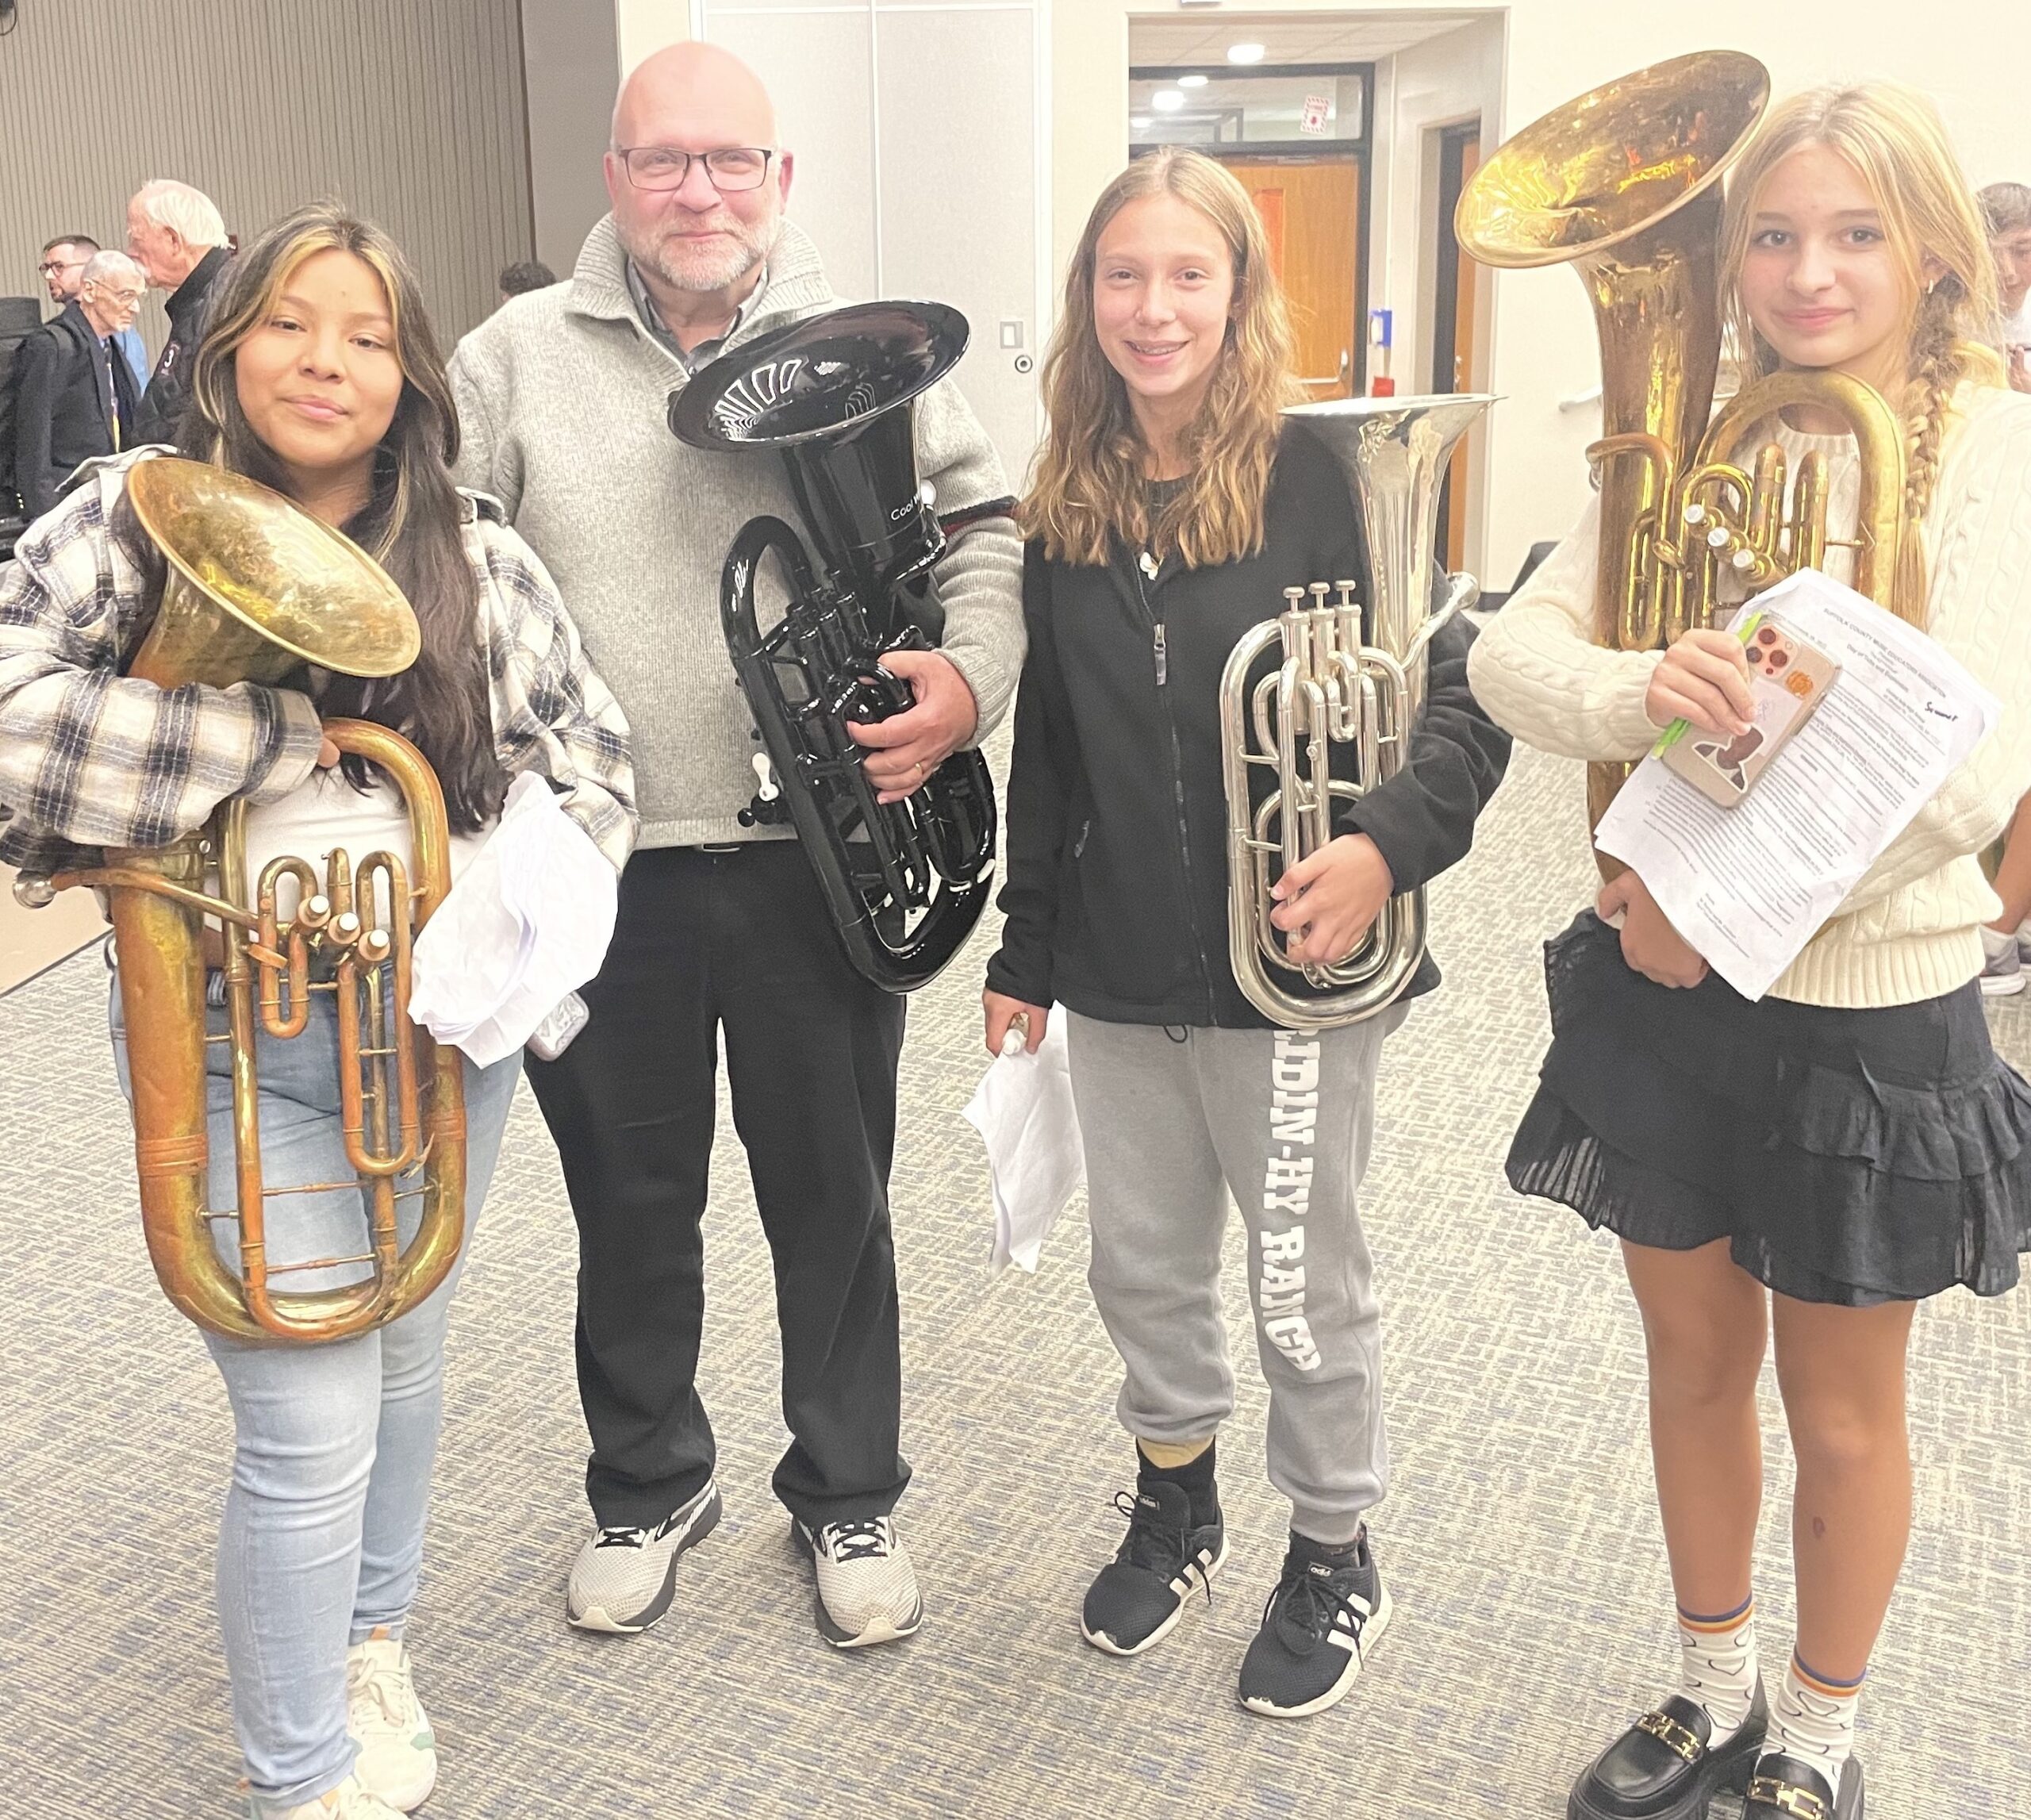 Three Bridgehampton School students represented the district’s music program at the Suffolk County Music Educators’ Day of Tuba and Euphonium, recently held at Central Islip High School. Students seventh-grader Yaredci Chavez, seventh-grader Kate Vinski, and eighth-grader Summer Lillie, accompanied by music teacher Dave Elliot, participated in rehearsals and clinics, culminating in a concert featuring guest artists the All-County Tuba-Euphonium Ensemble, the Faculty Ensemble, the Long Island Tuba Quartet and the Massed Tuba Ensemble. COURTESY BRIDGEHAMPTON SCHOOL DISTRICT